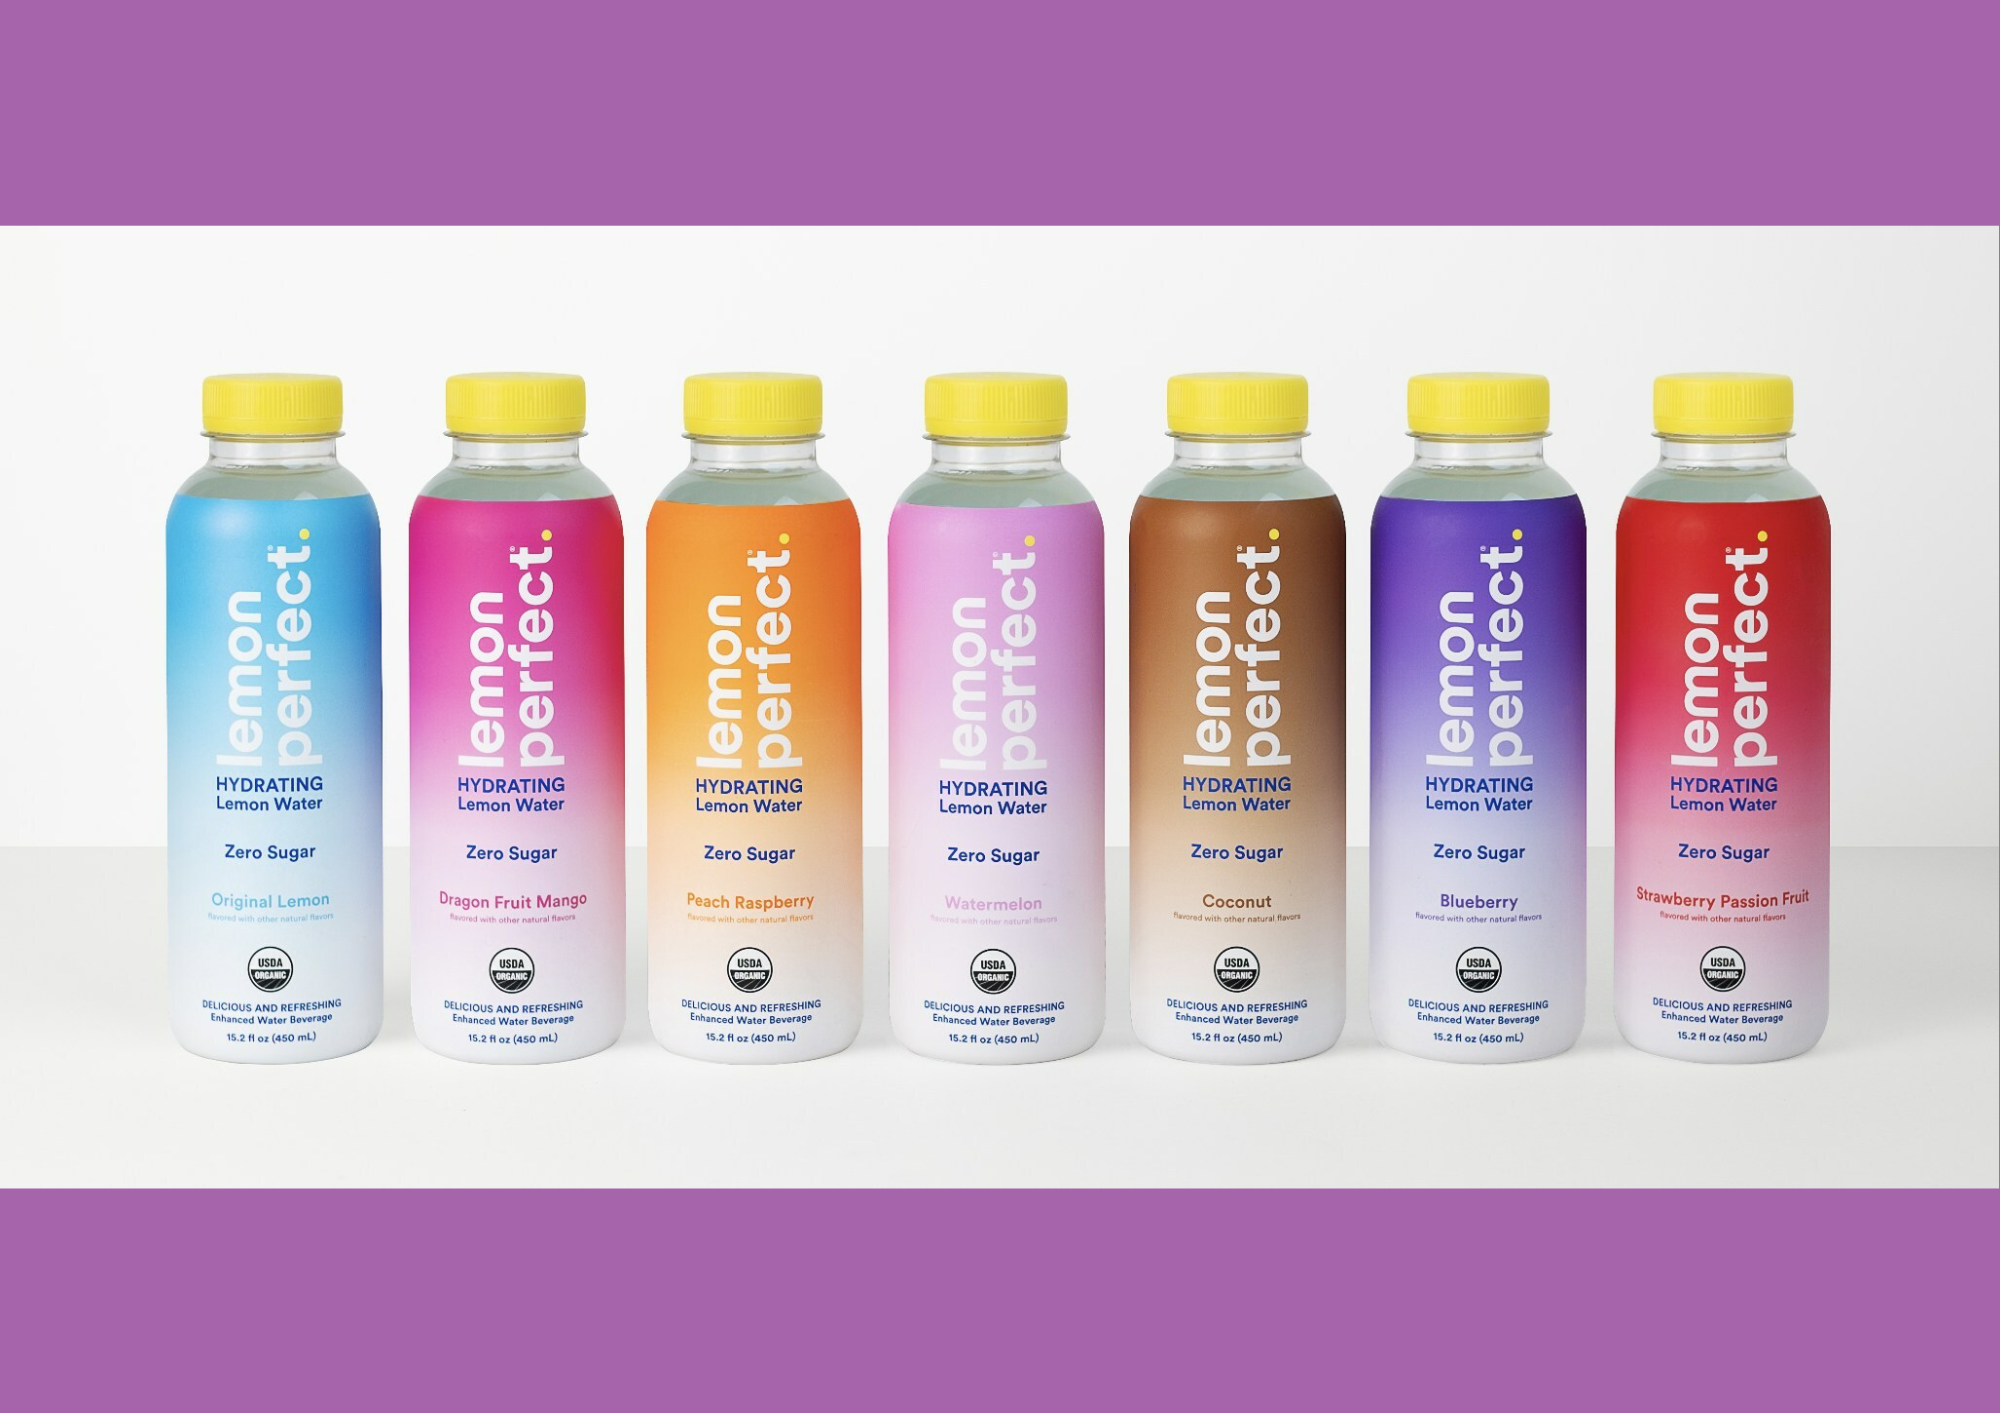 New beverage launches: March 2021